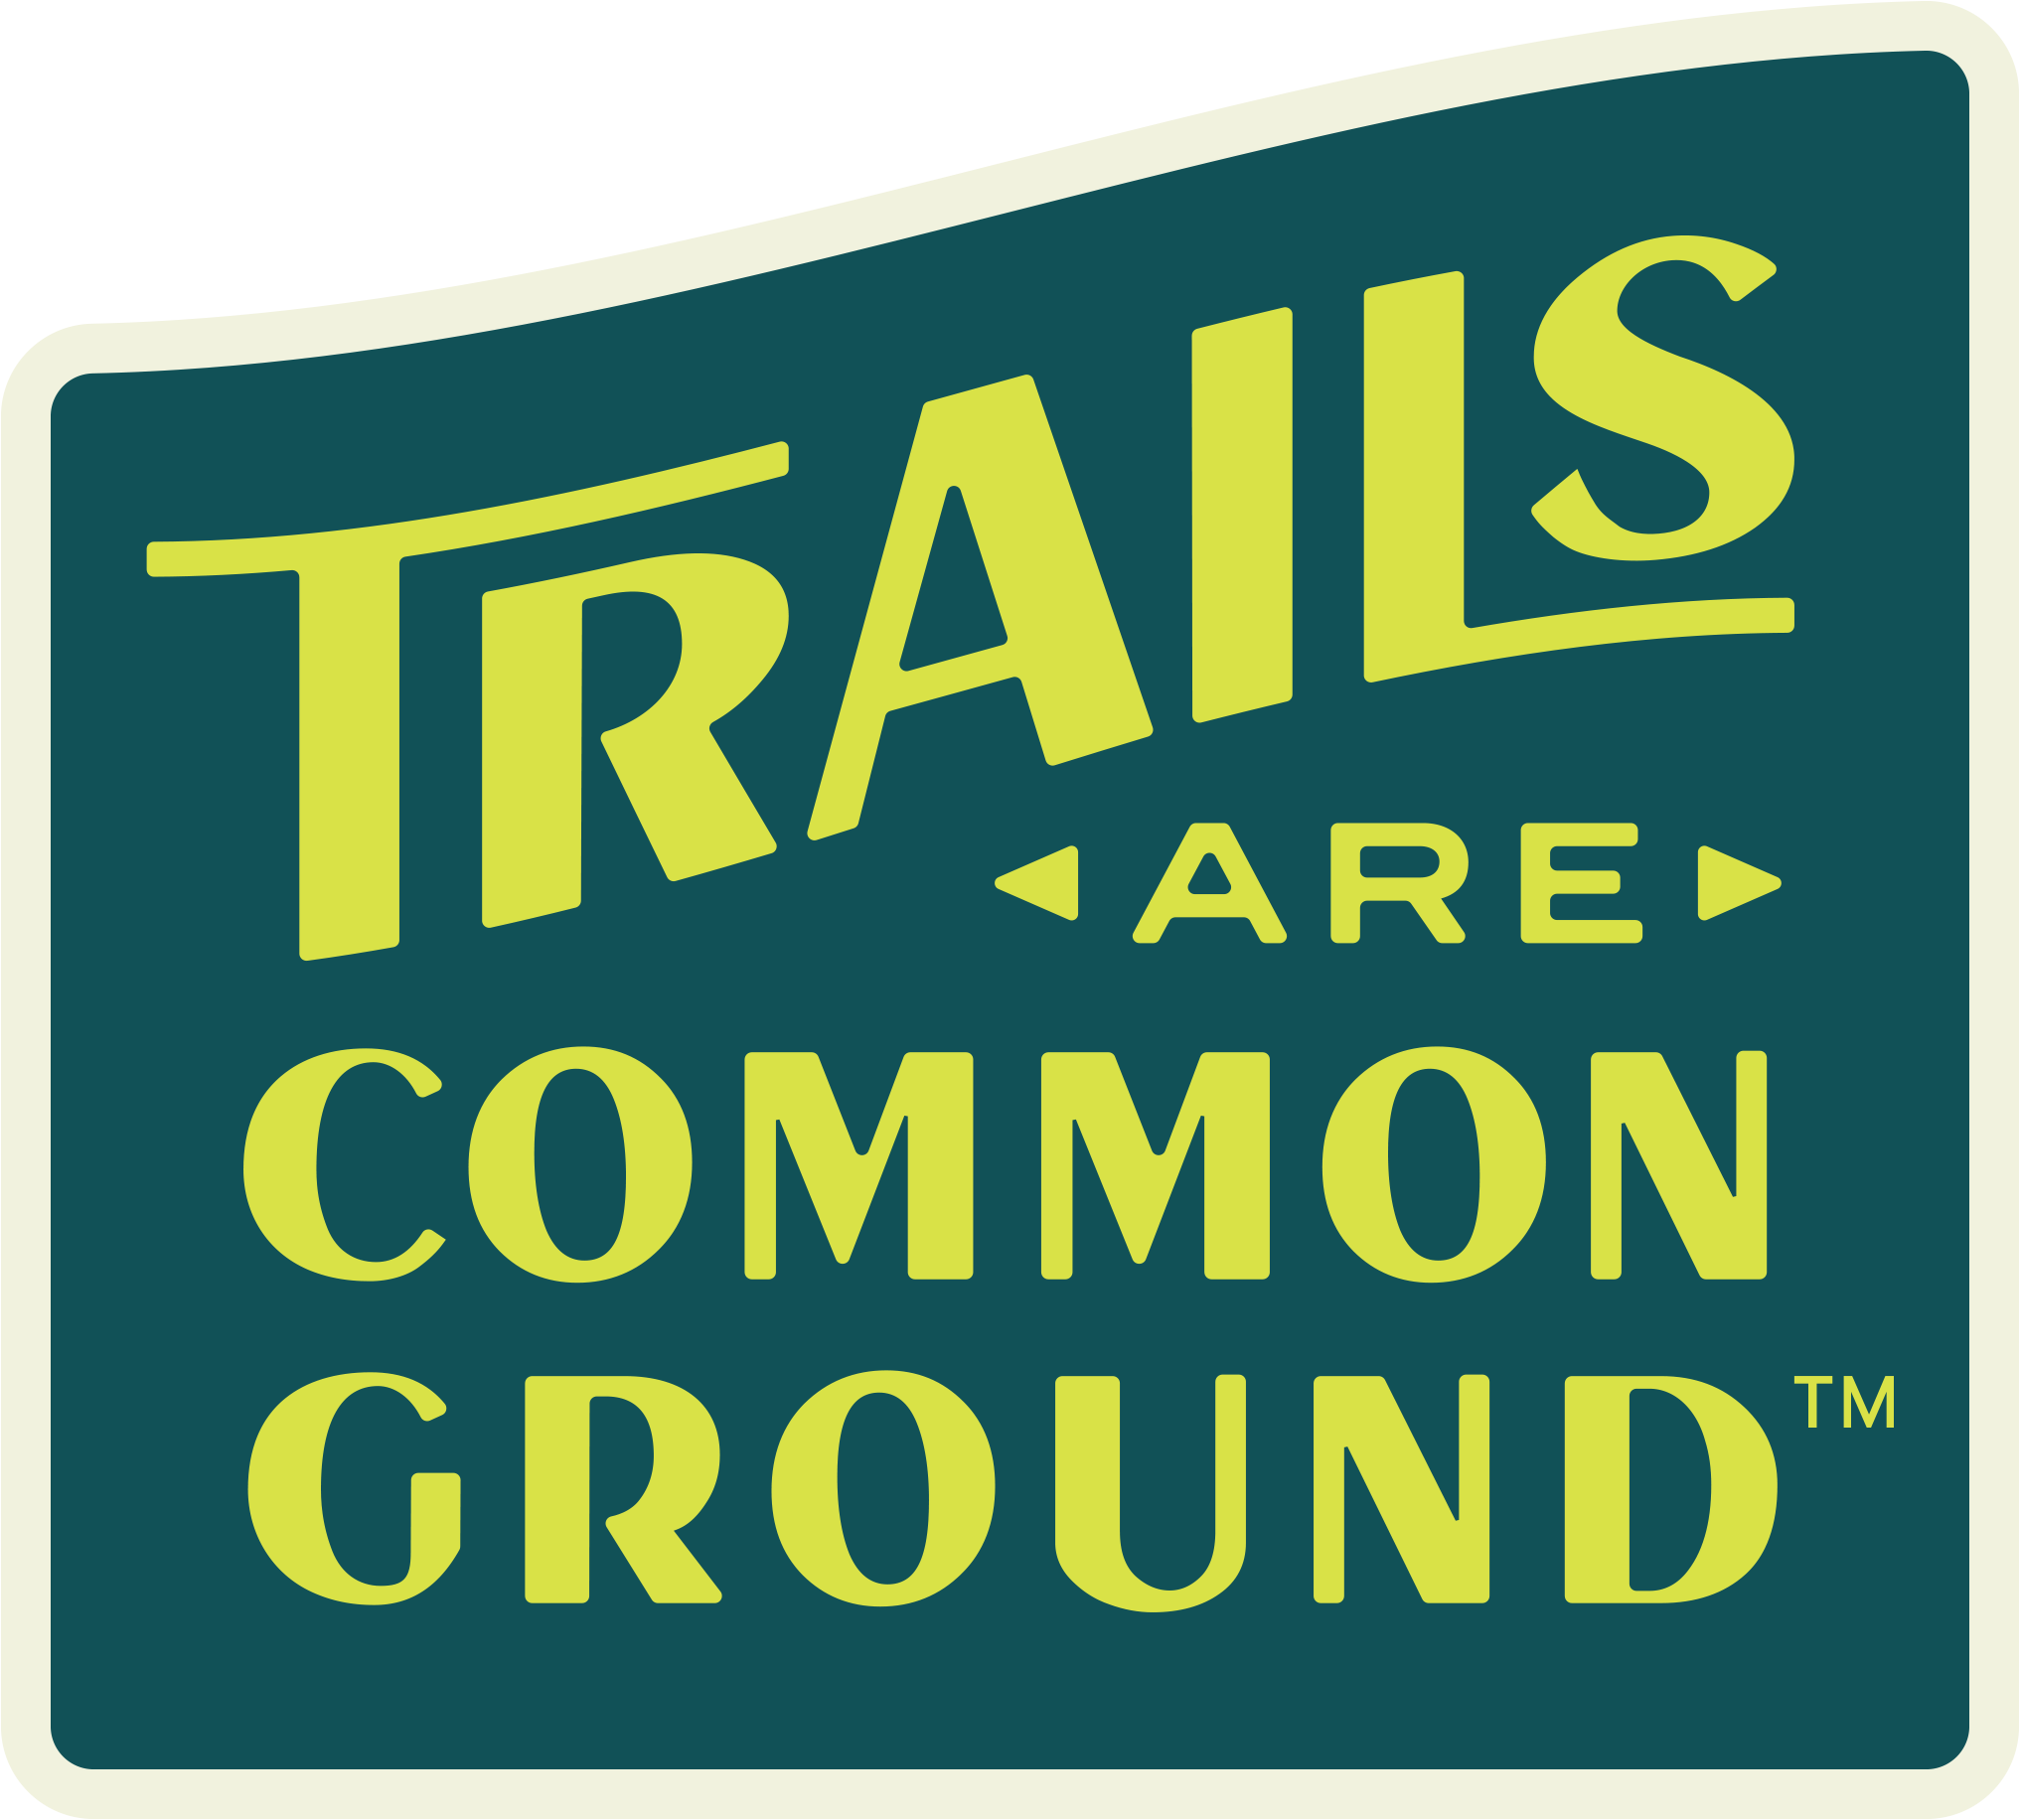 Trails are Common Ground logo